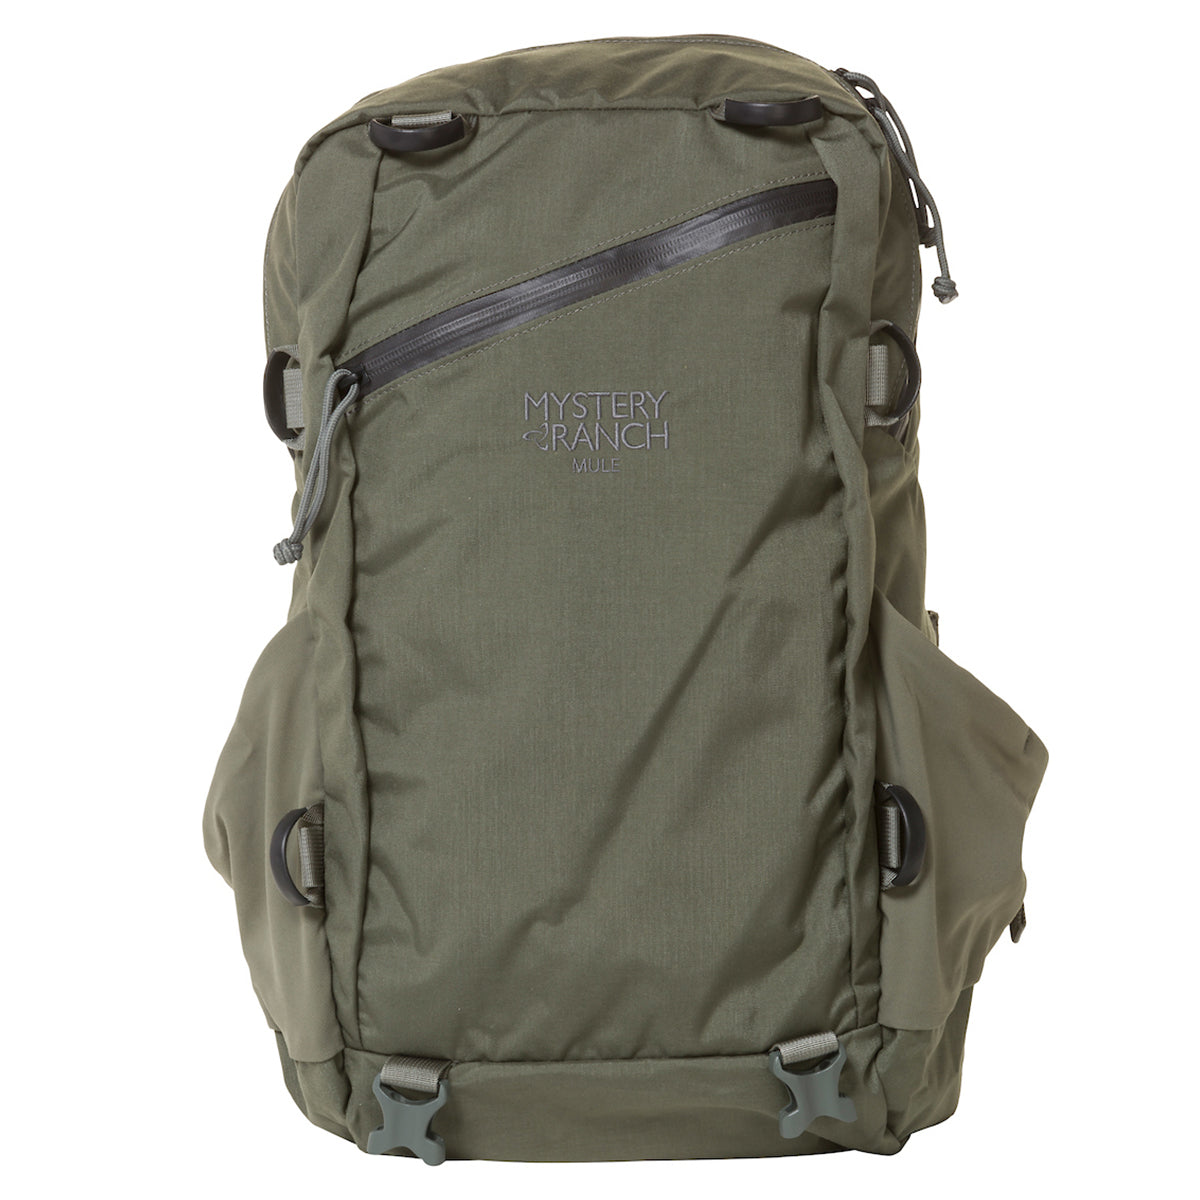 Shop for Mystery Ranch Mule Bag Only | GOHUNT